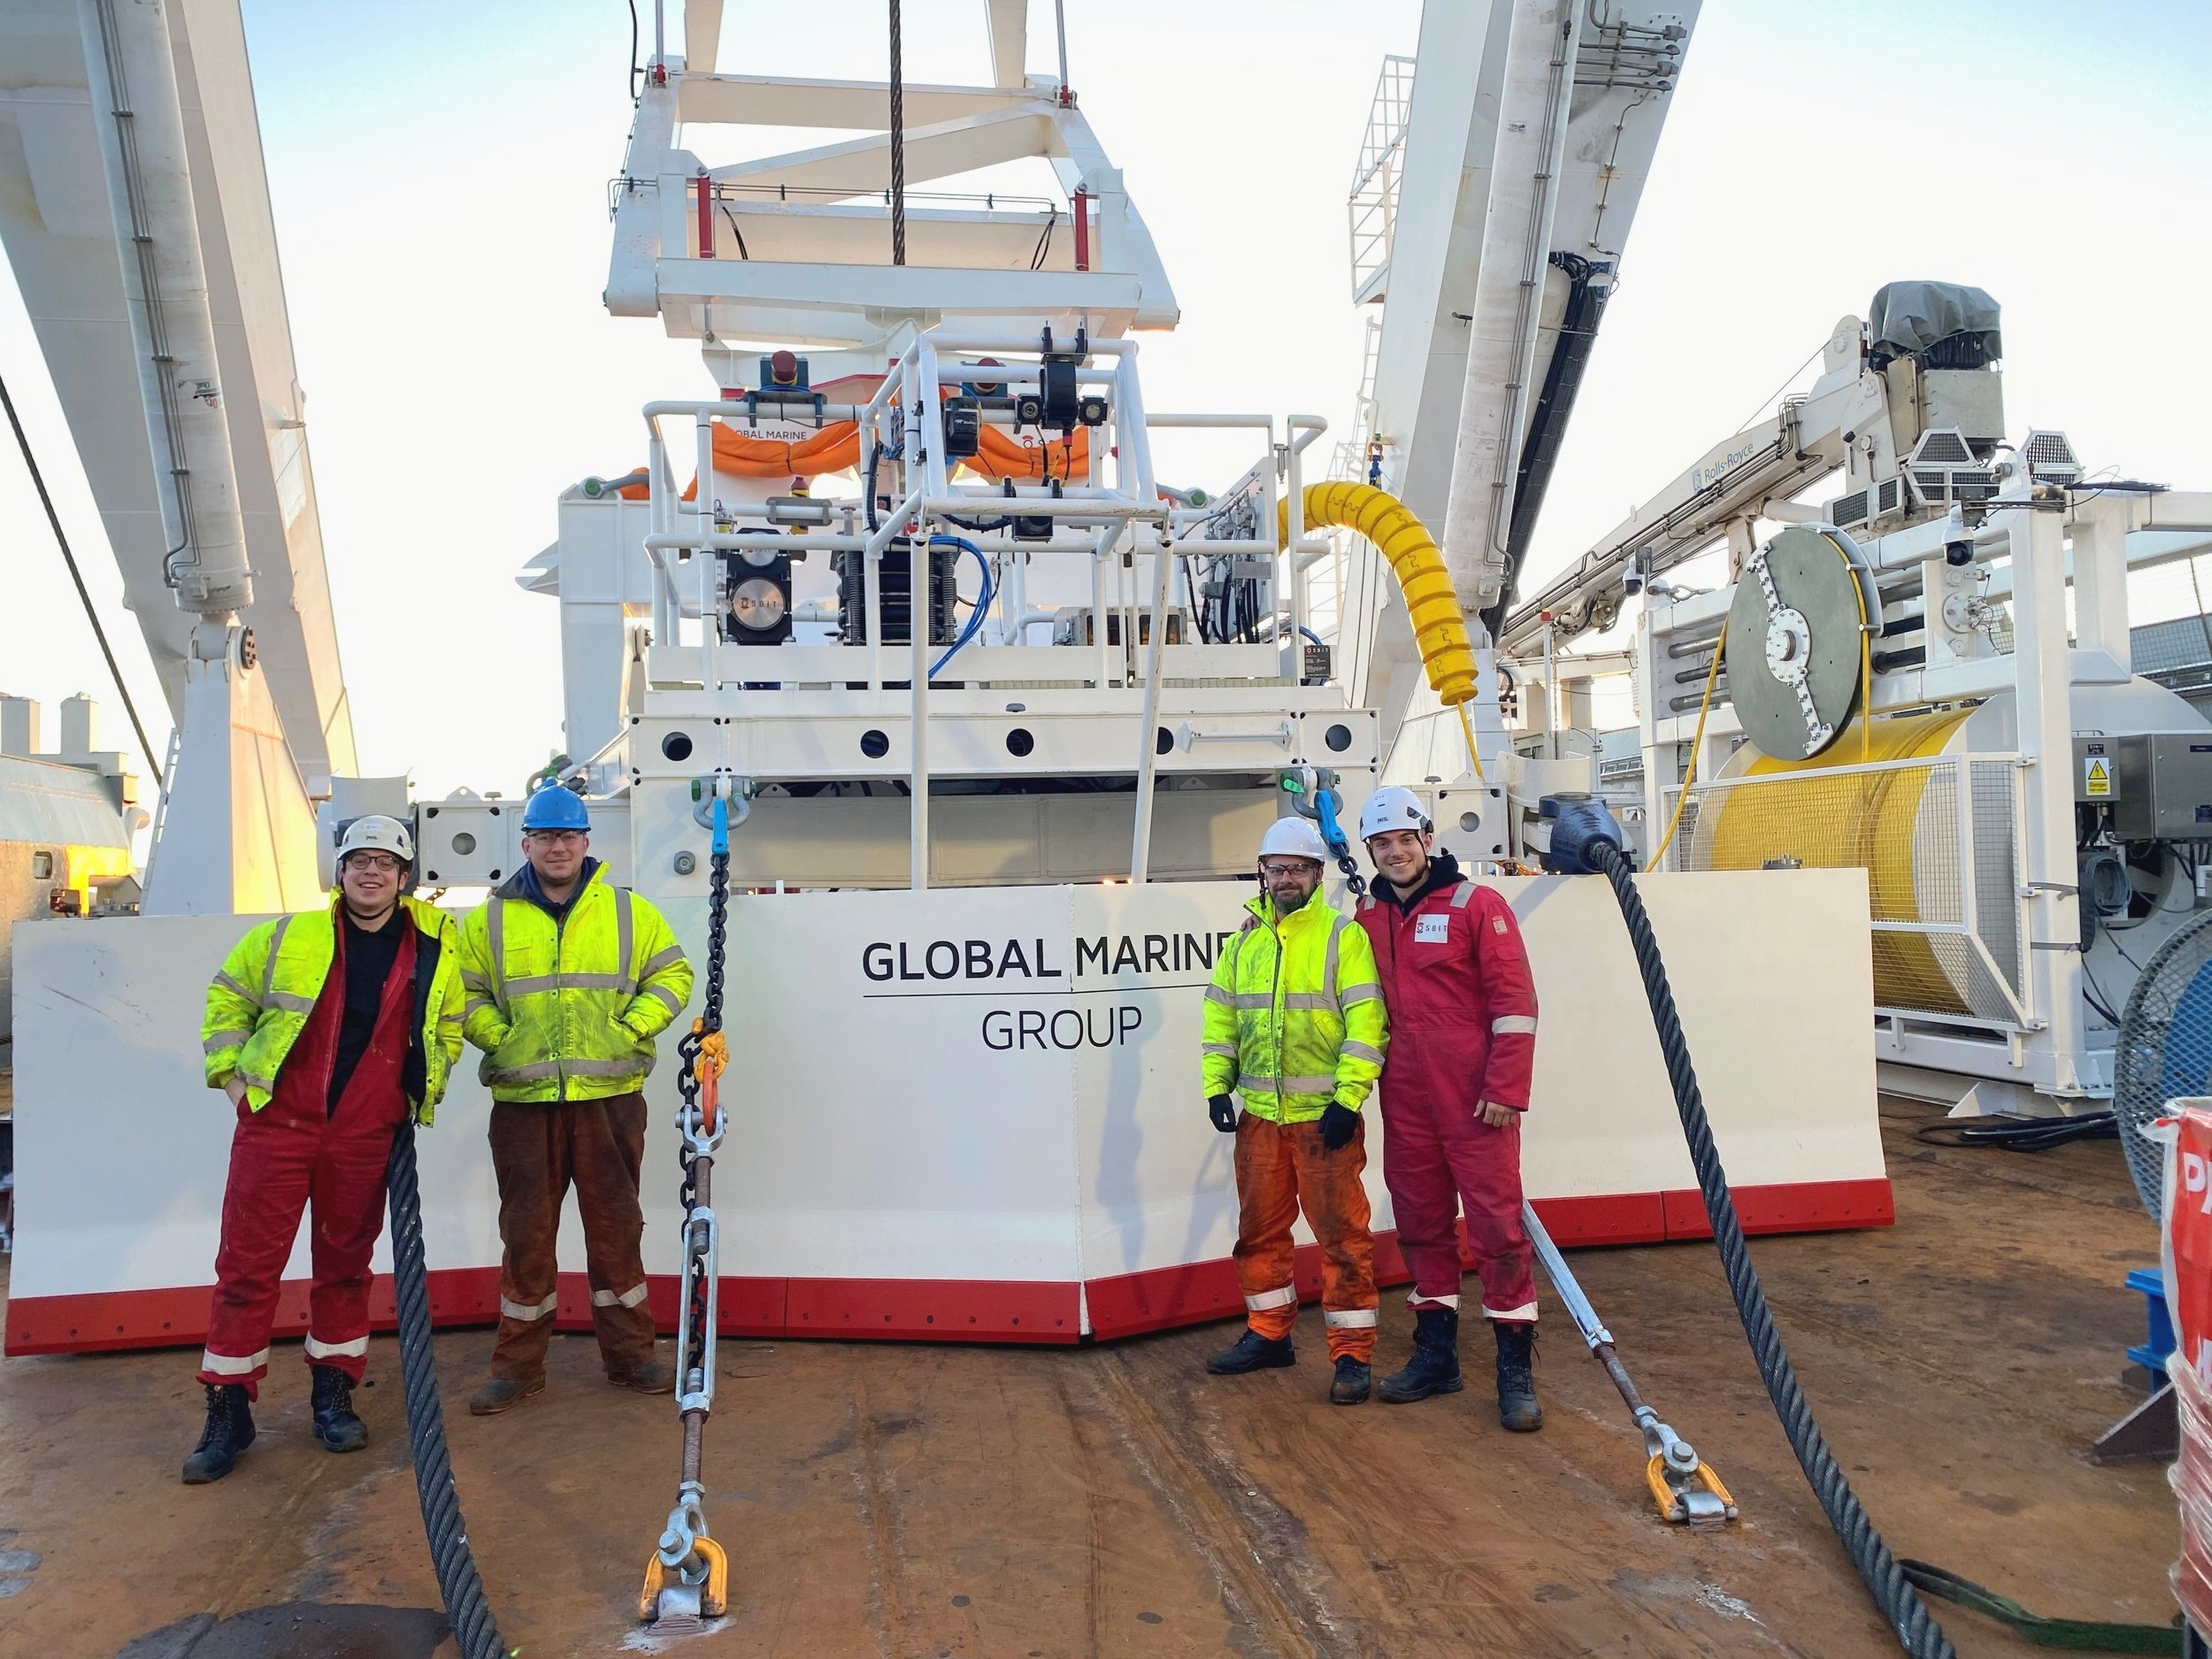 Osbit's subsea plough mobilisation team with the i-plough system.